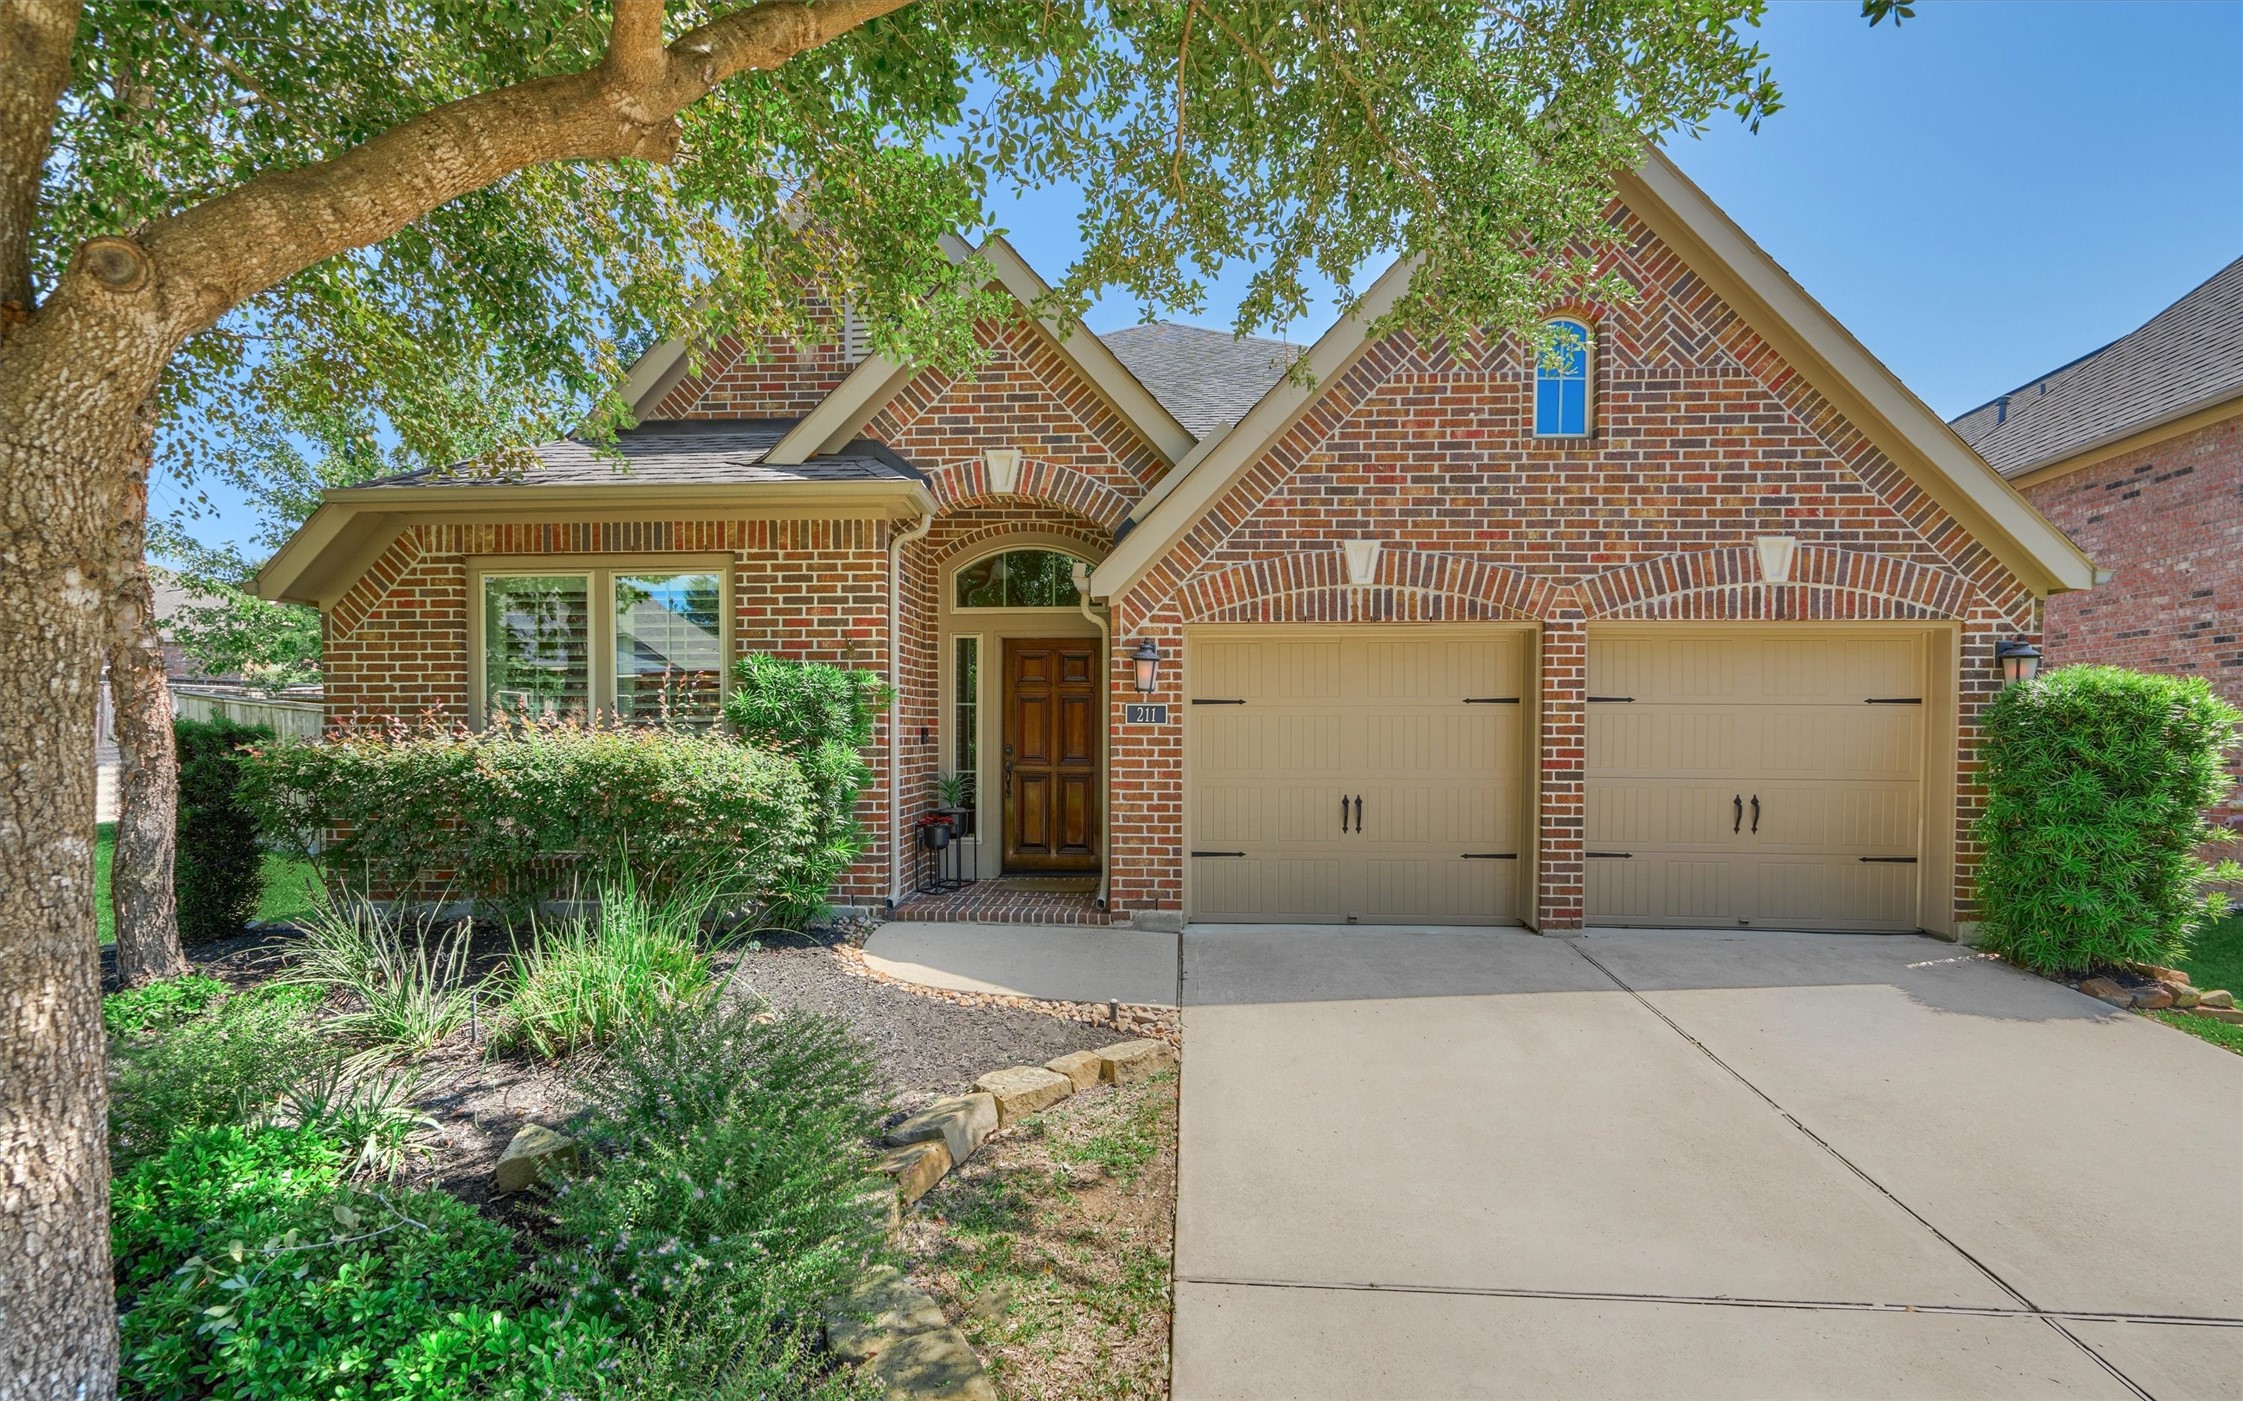 This one story home is beautiful from the curb to back yard! The brick exterior and carriage style garage doors give a custom look to this luxurious ONE STORY home!